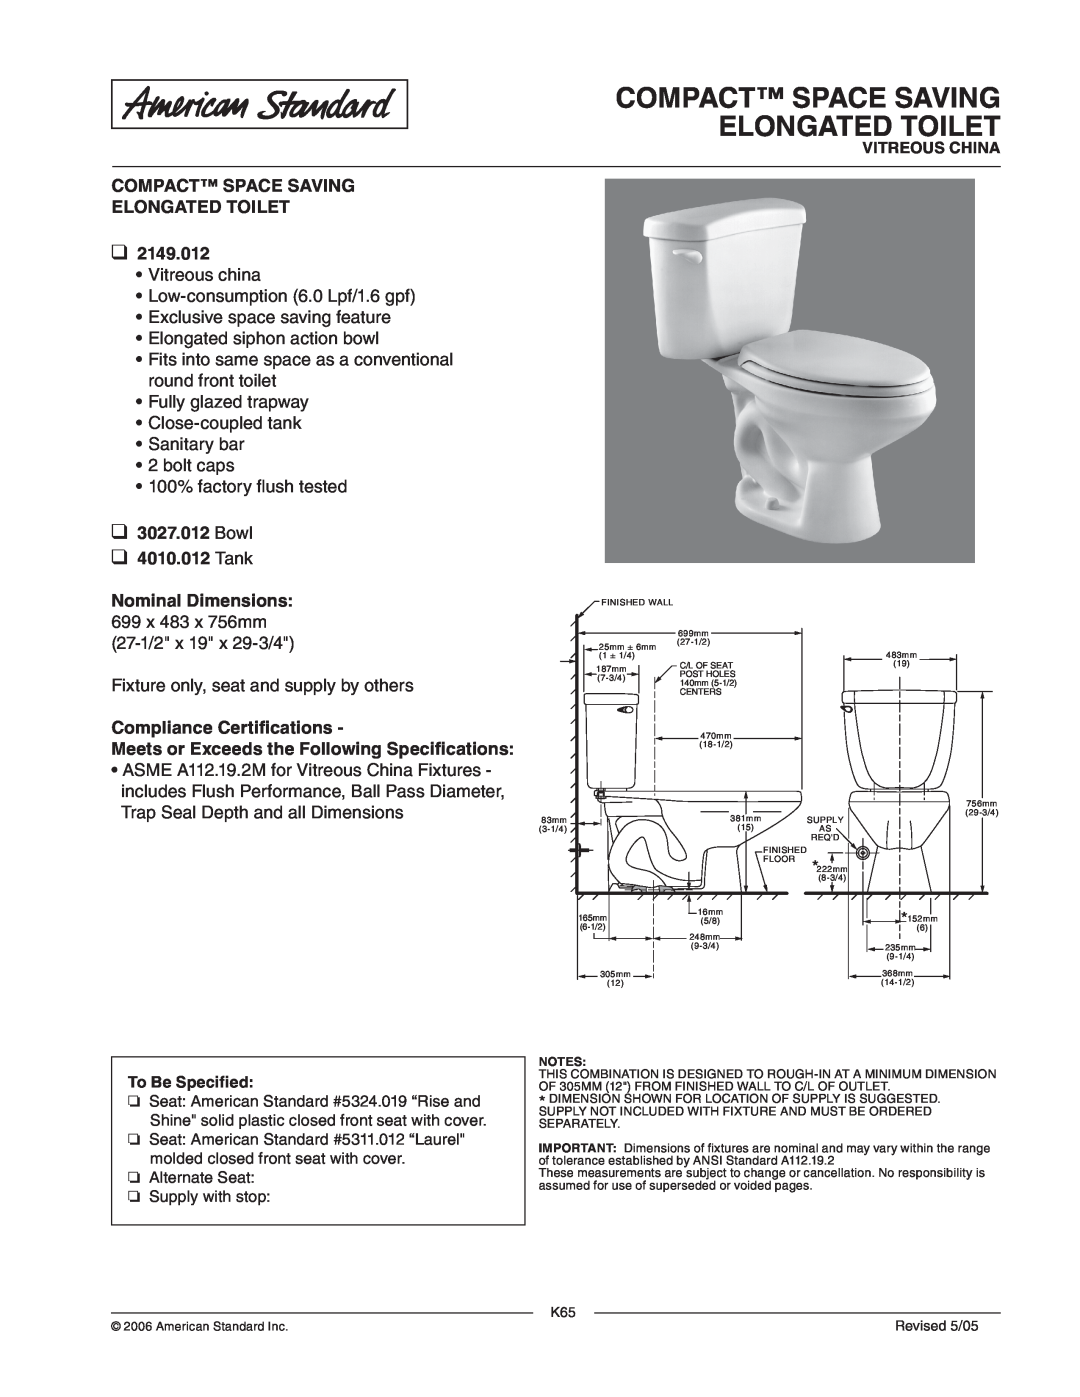 American Standard 3027.012 dimensions Compact Space Saving Elongated Toilet, Bowl 4010.012 Tank, Compliance Certifications 